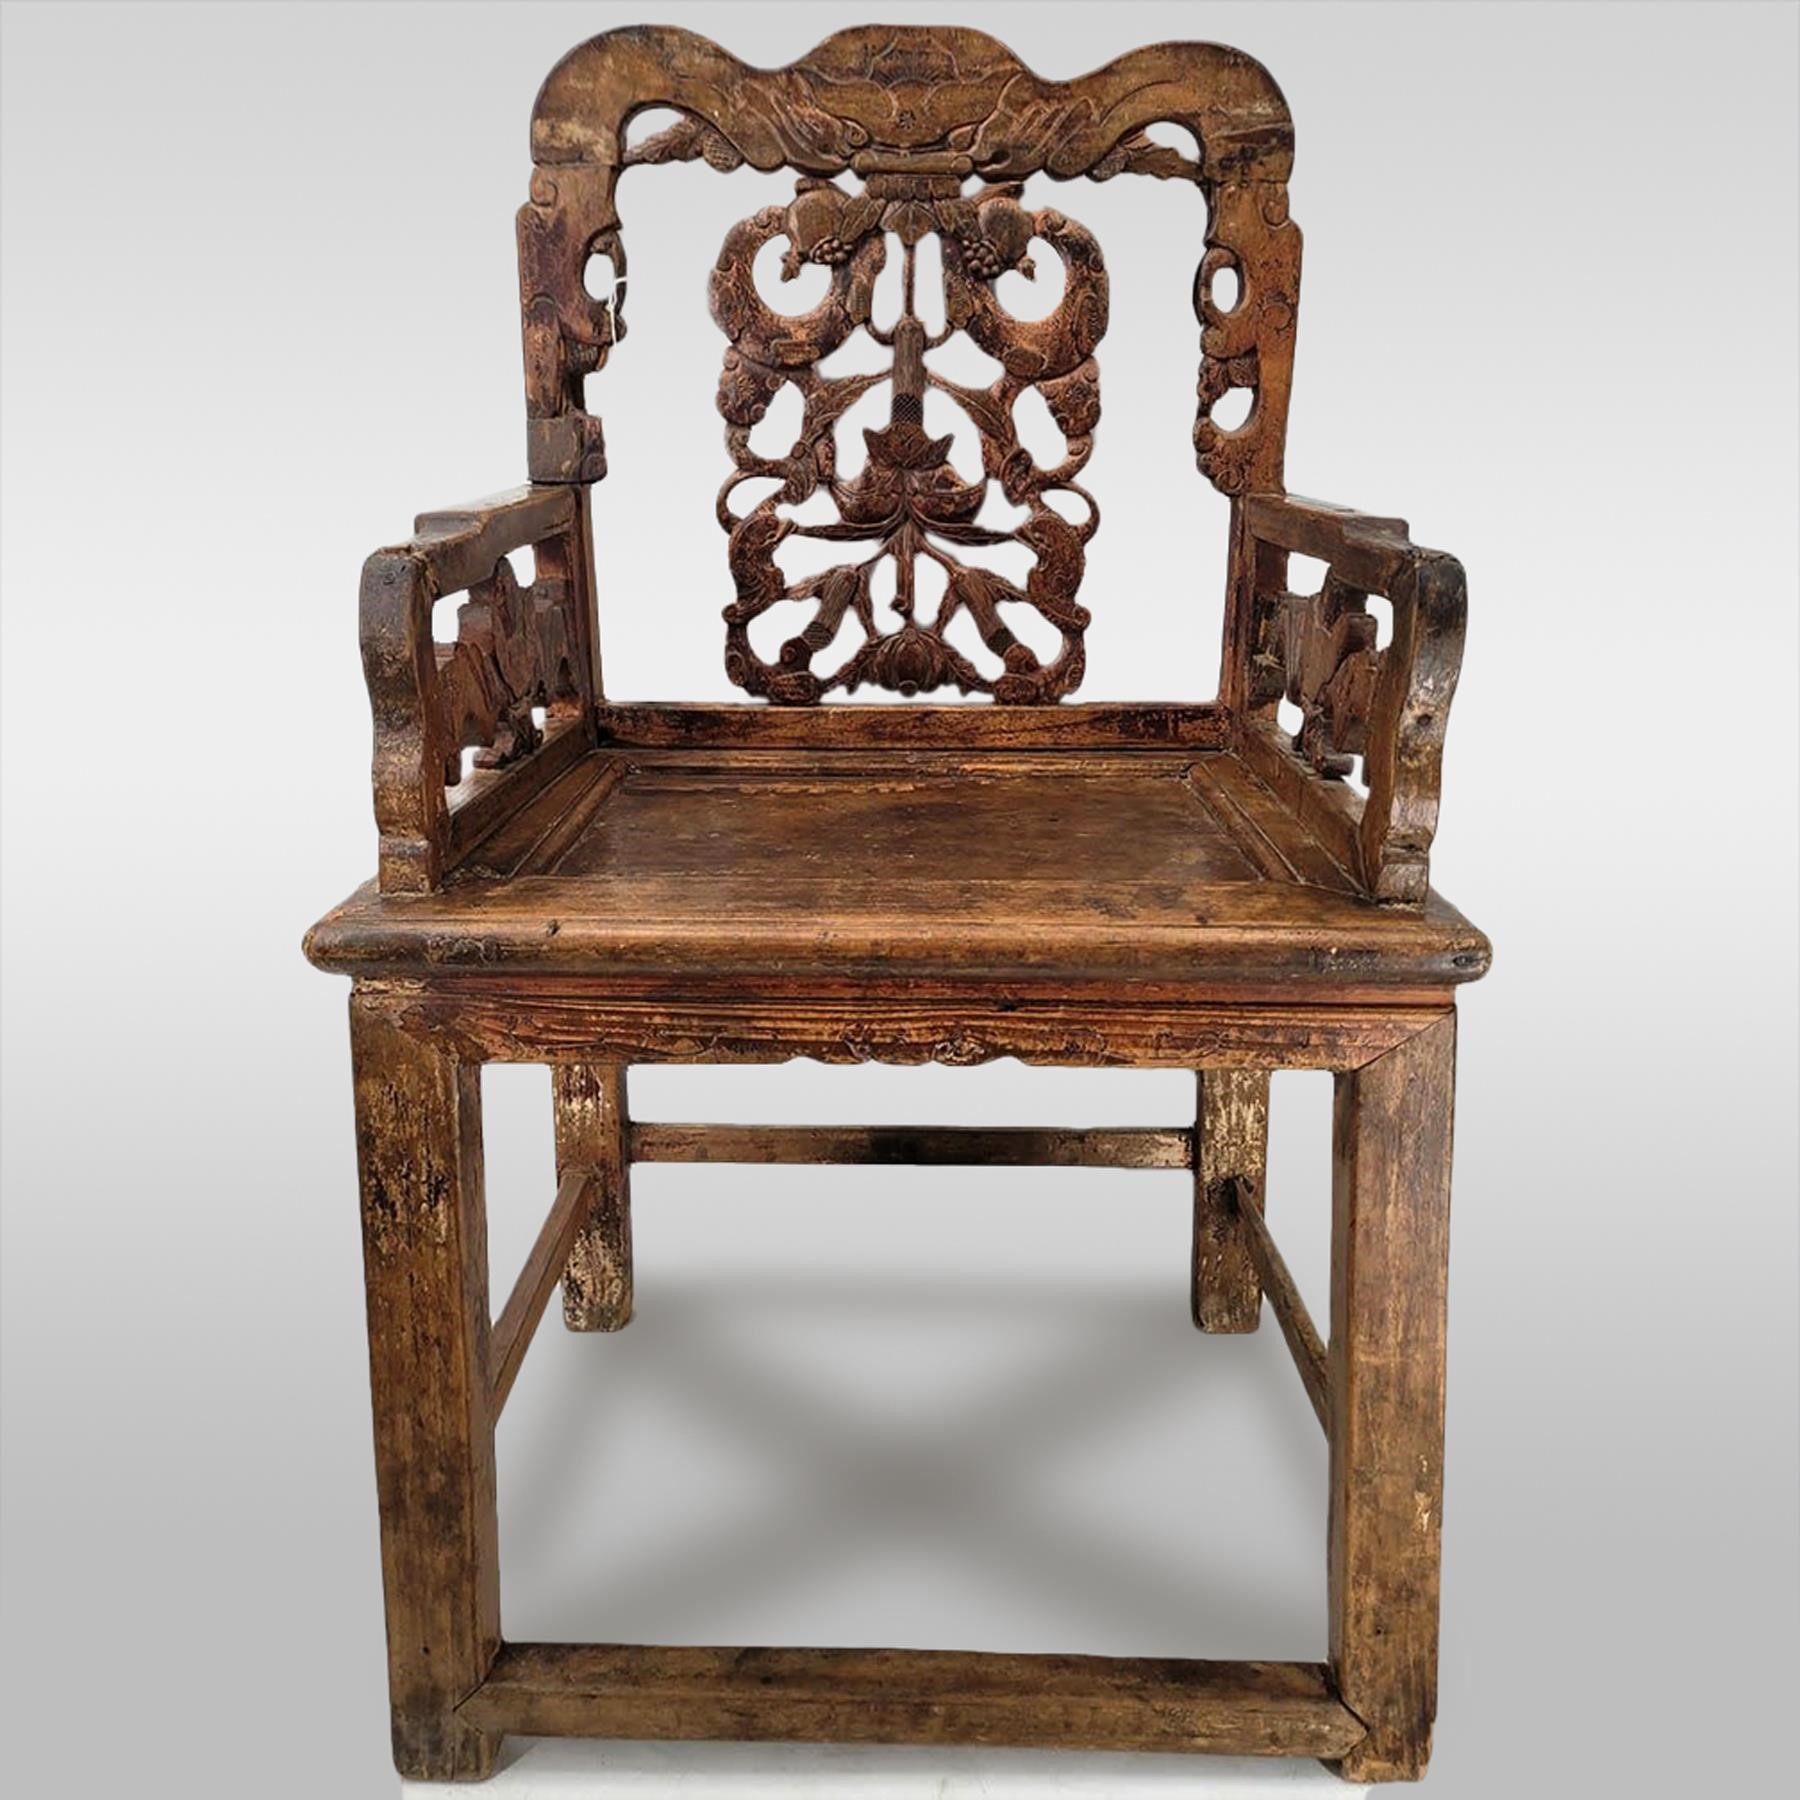 Very Old Antique Chinese Chair Possibly Elmwood